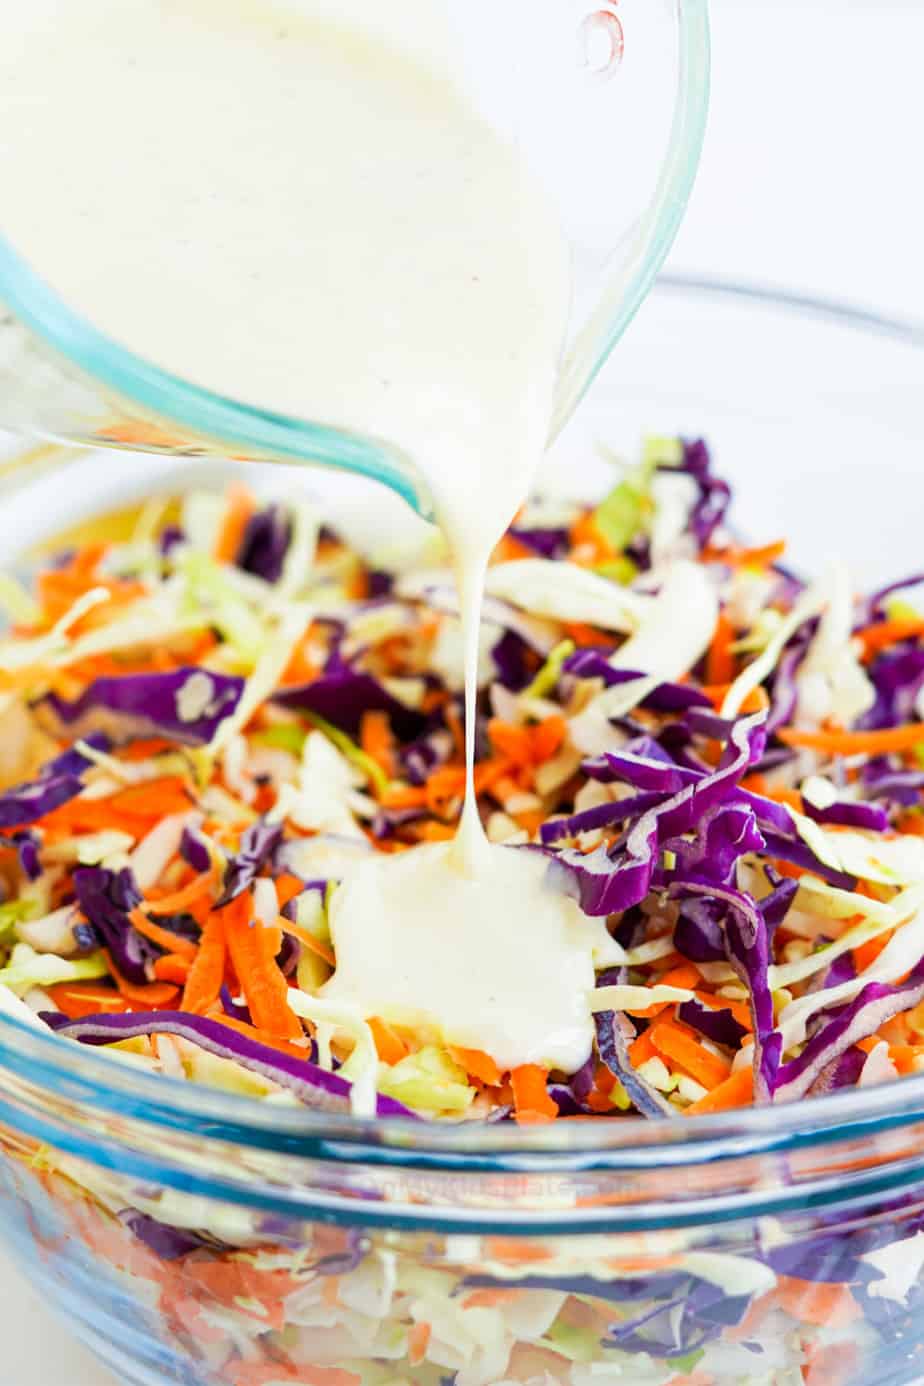 Pouring dressing over cabbage and carrot mixture in a clear bowl from the side.